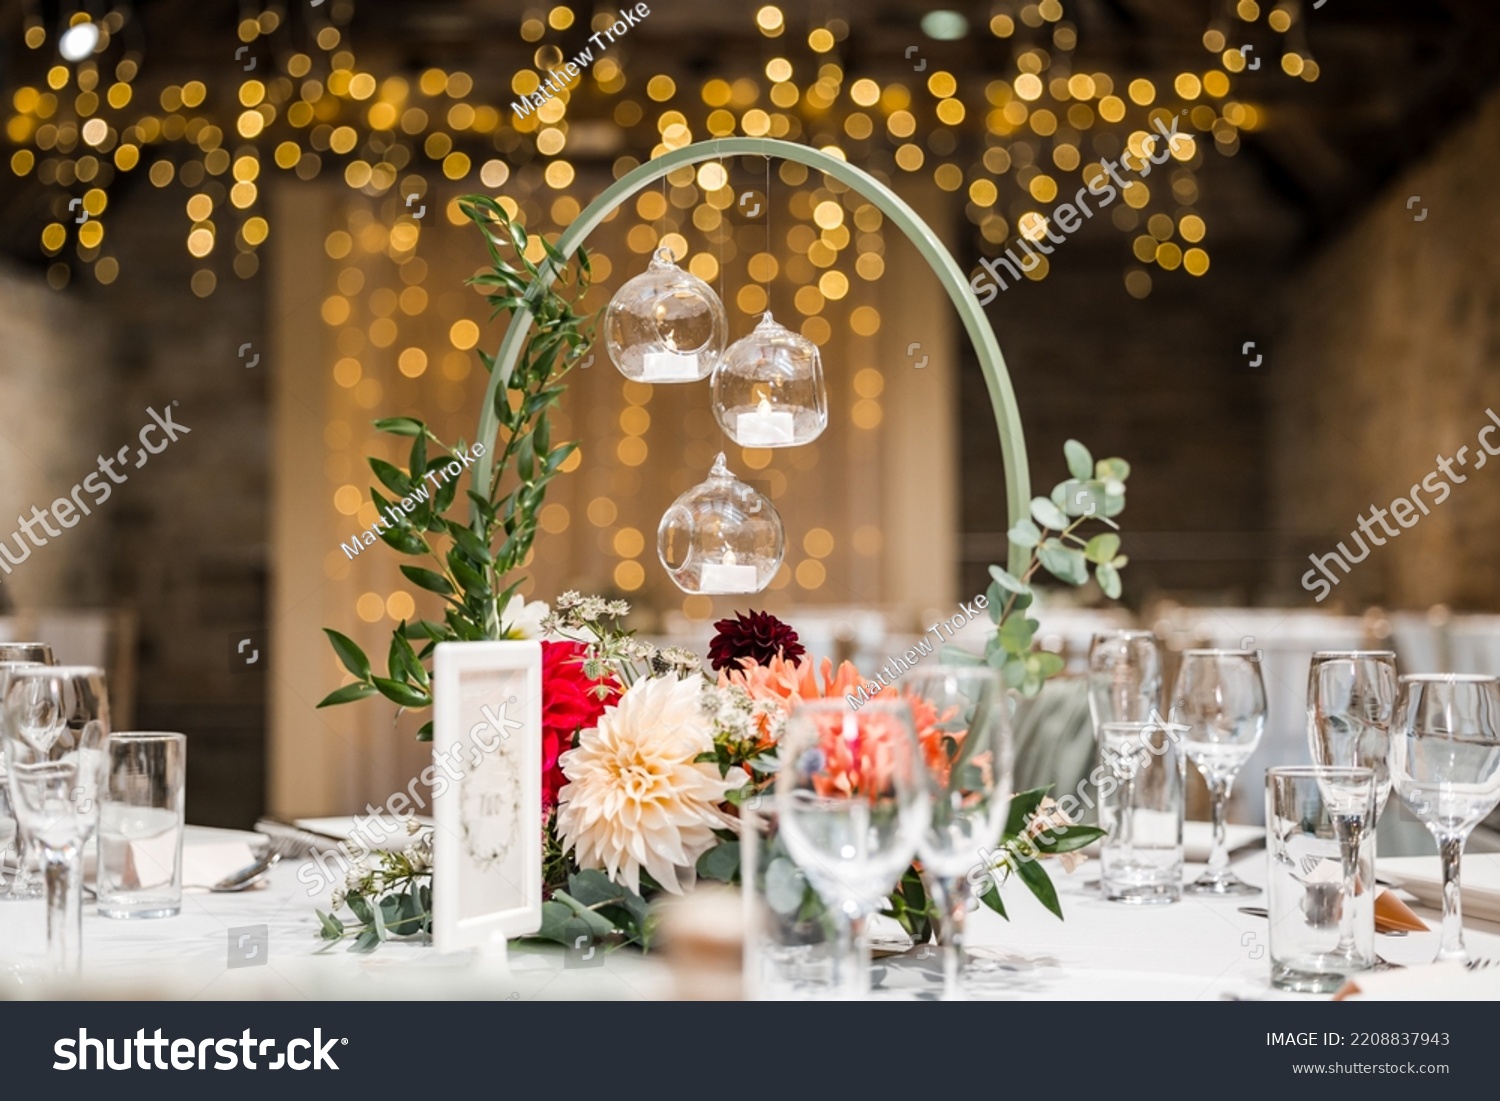 Beautiful candle light wedding table decor with flowers and out of focus twinkle lights. Wedding breakfast party. #2208837943